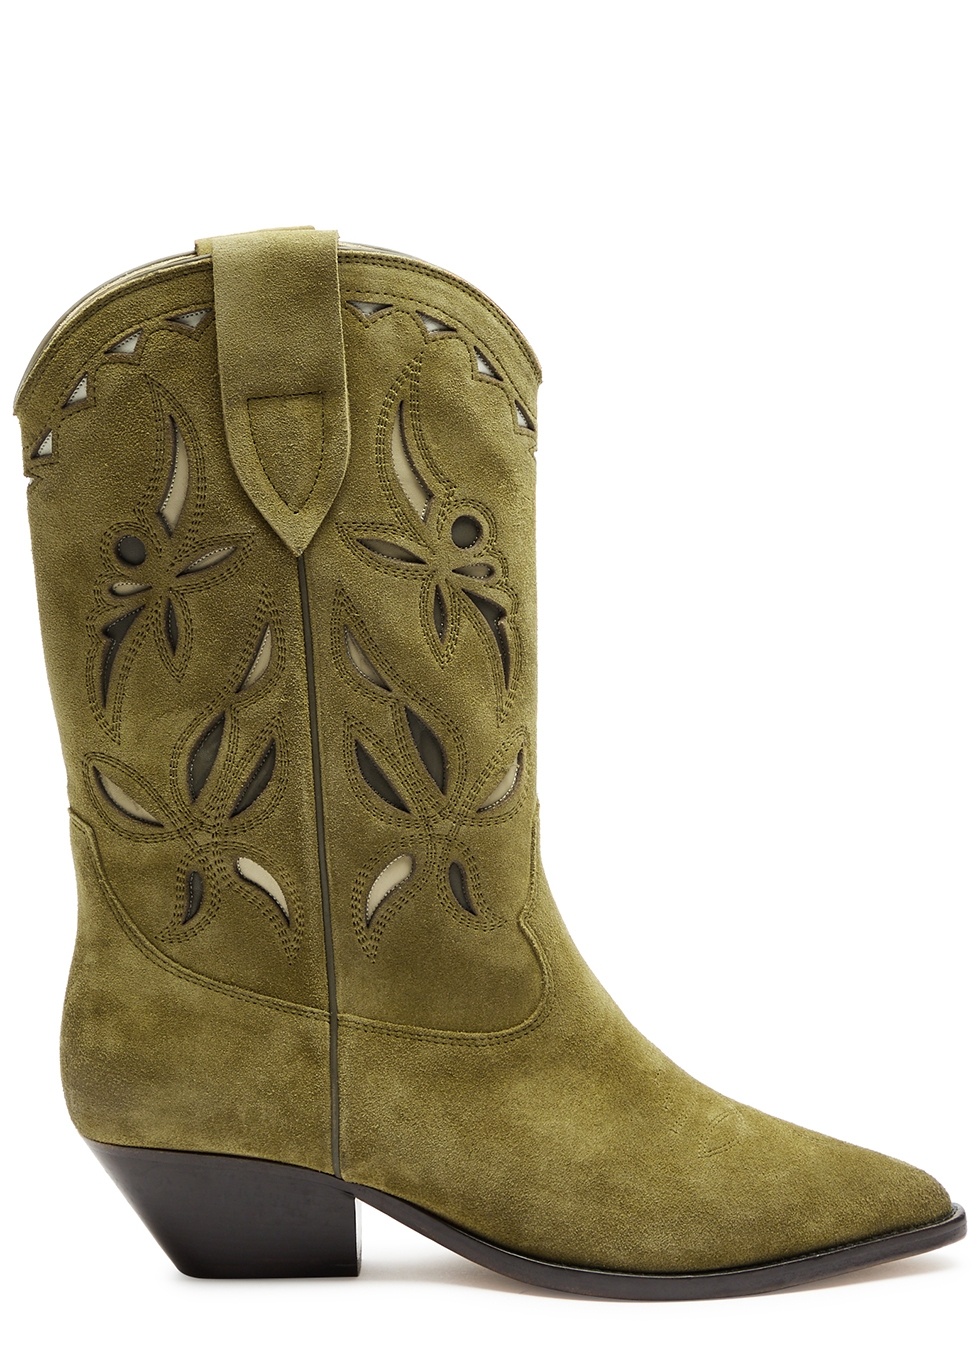 Isabel Marant Yellow Dahope Boots